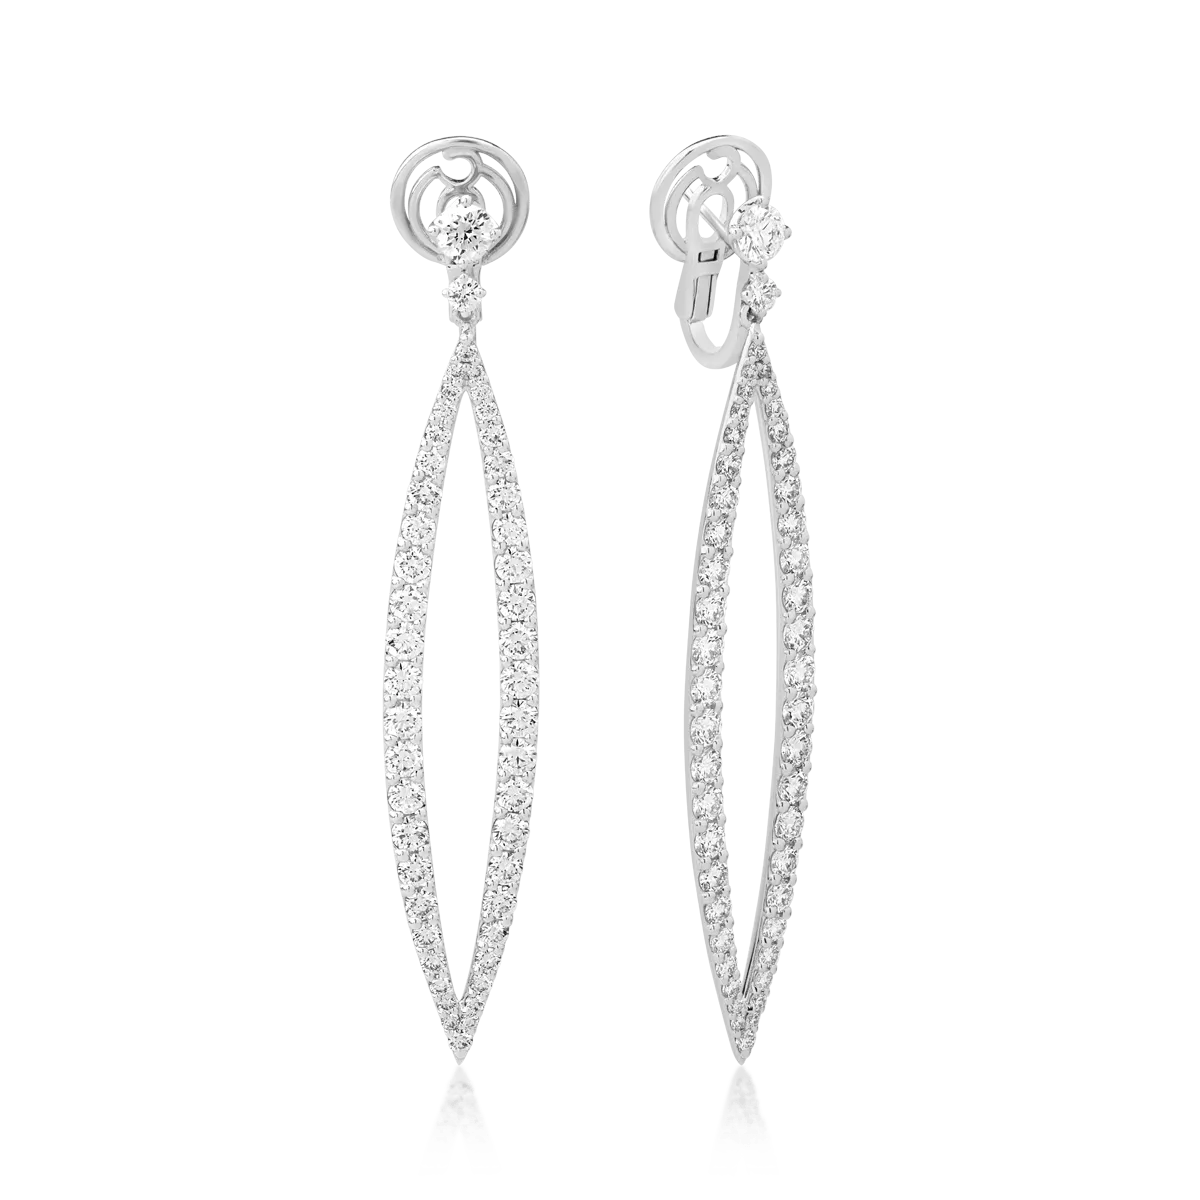 18K white gold earrings with 5.88ct diamonds